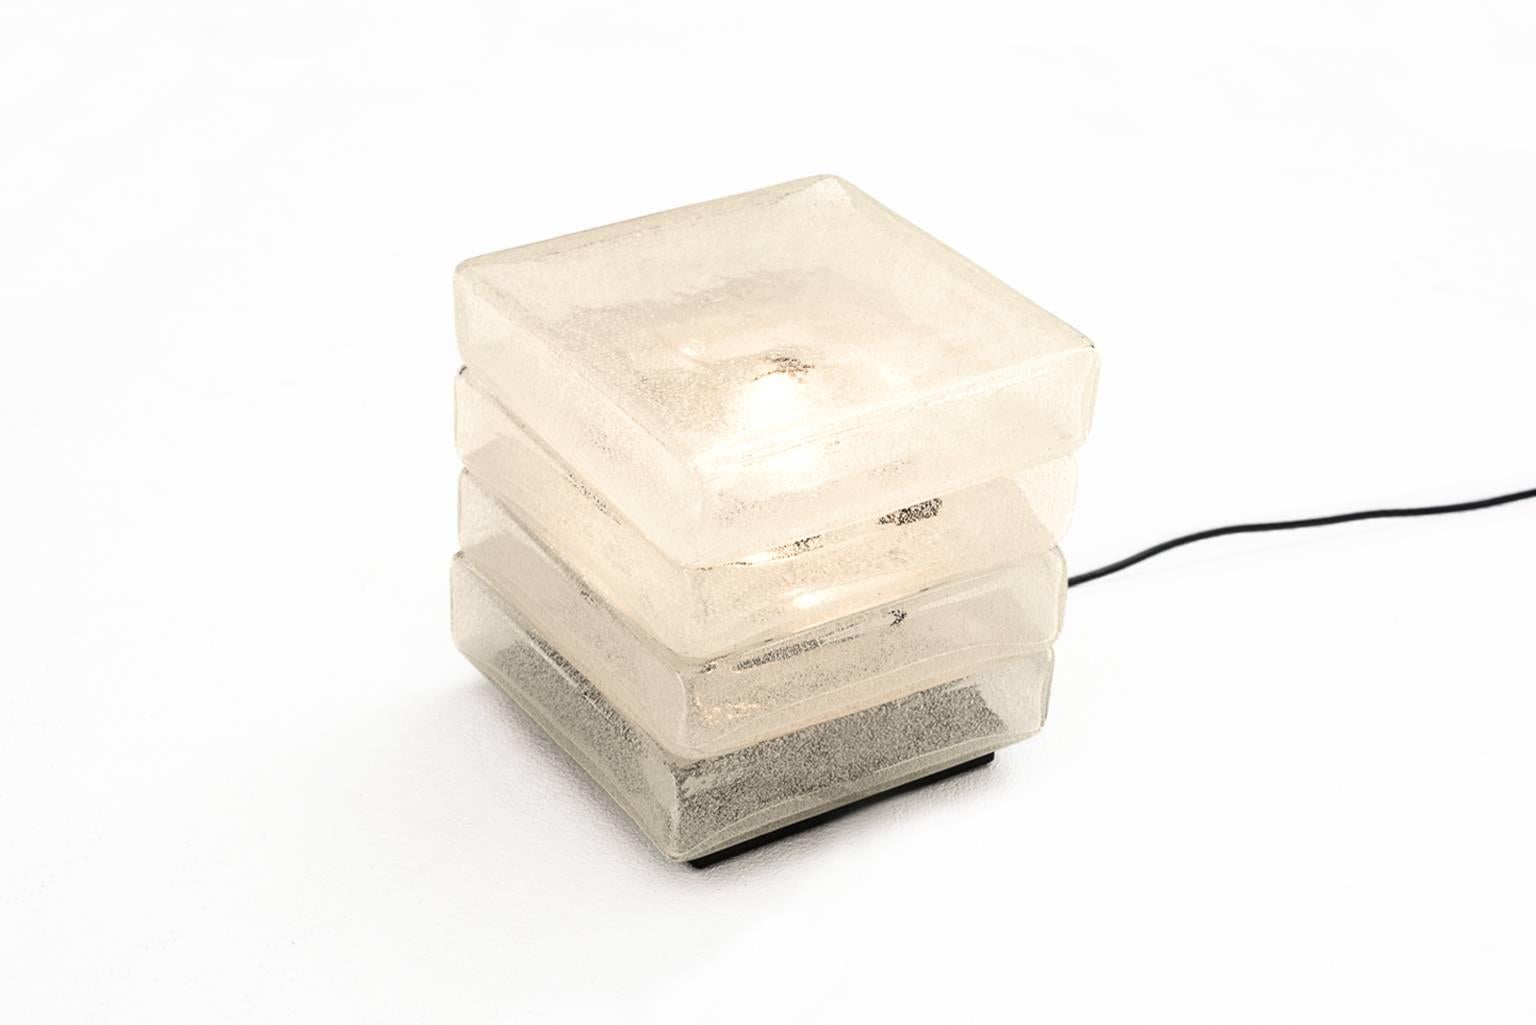 Cubic table lamp by Carlo Nason for A.V. Mazzega, Italy, 1960s.
Composed from four handblown Murano glass pieces stacked together into a cube. This is a rare Pulegoso glass version; glass with a lot of bubbles which work like a filter. The lamp is